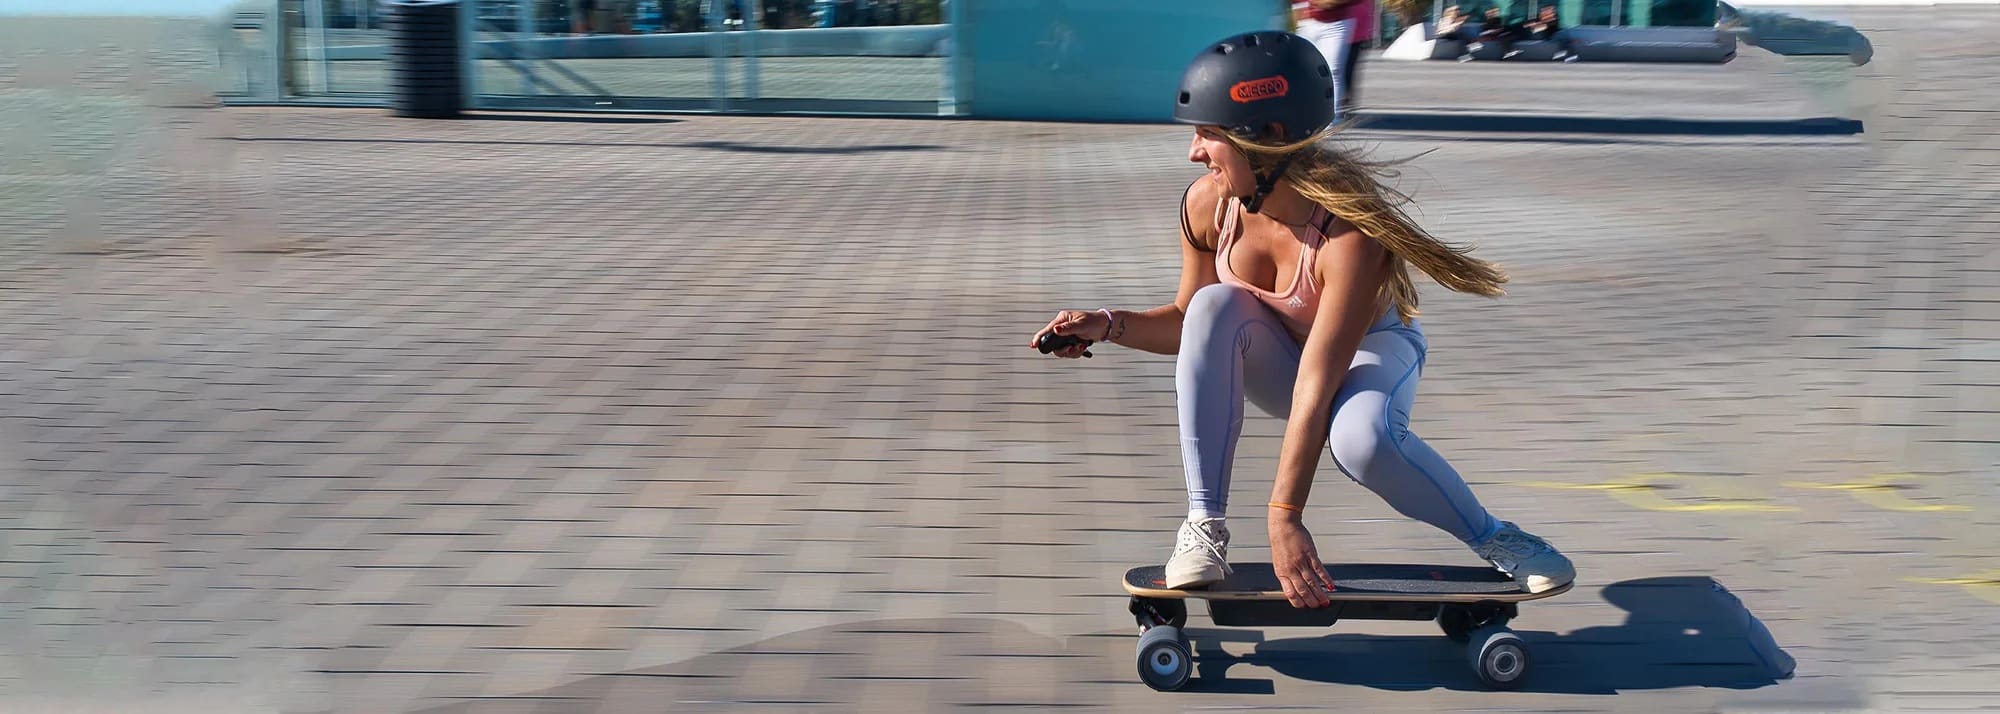 Blonde riding a Meepo Electric Skateboard